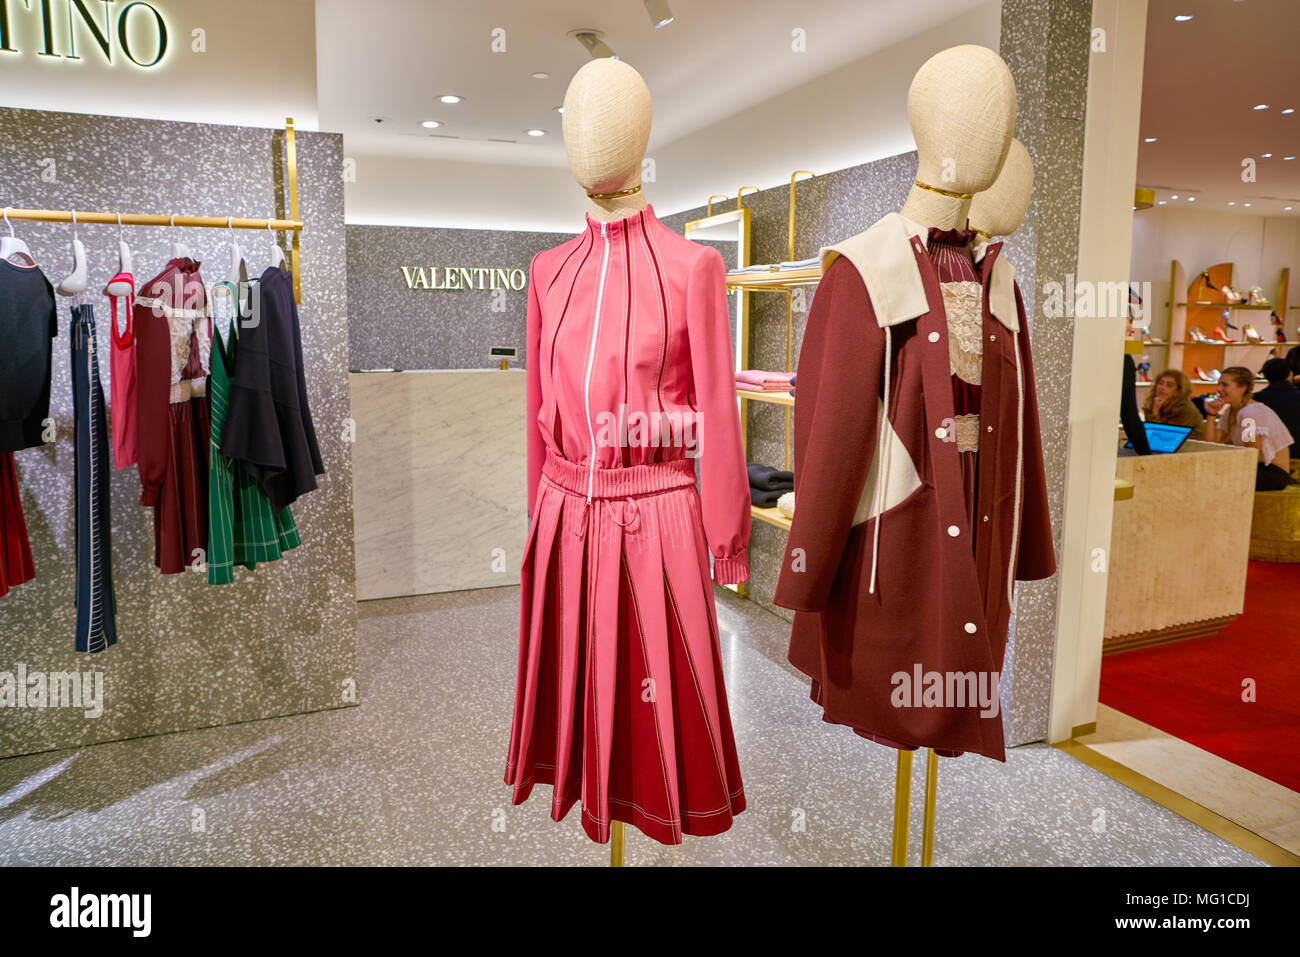 Valentino Shop Milan, Italy High Resolution Stock Photography Images